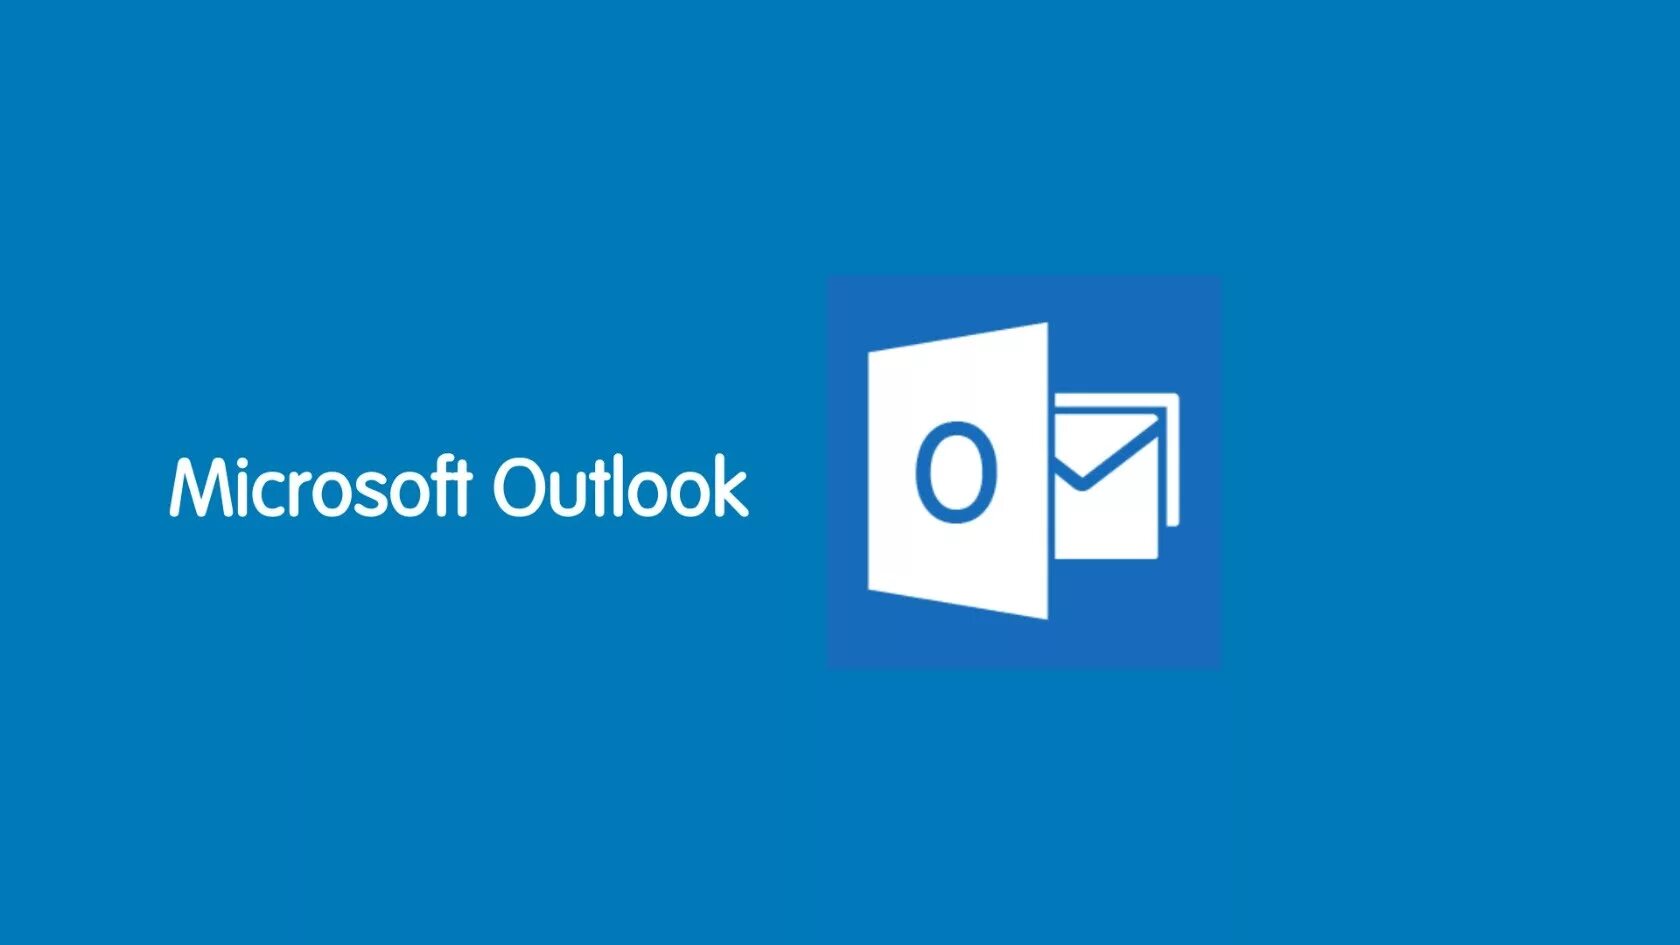 Microsoft Outlook. Значок Outlook. Outlook логотип. Microsoft Outlook значок.